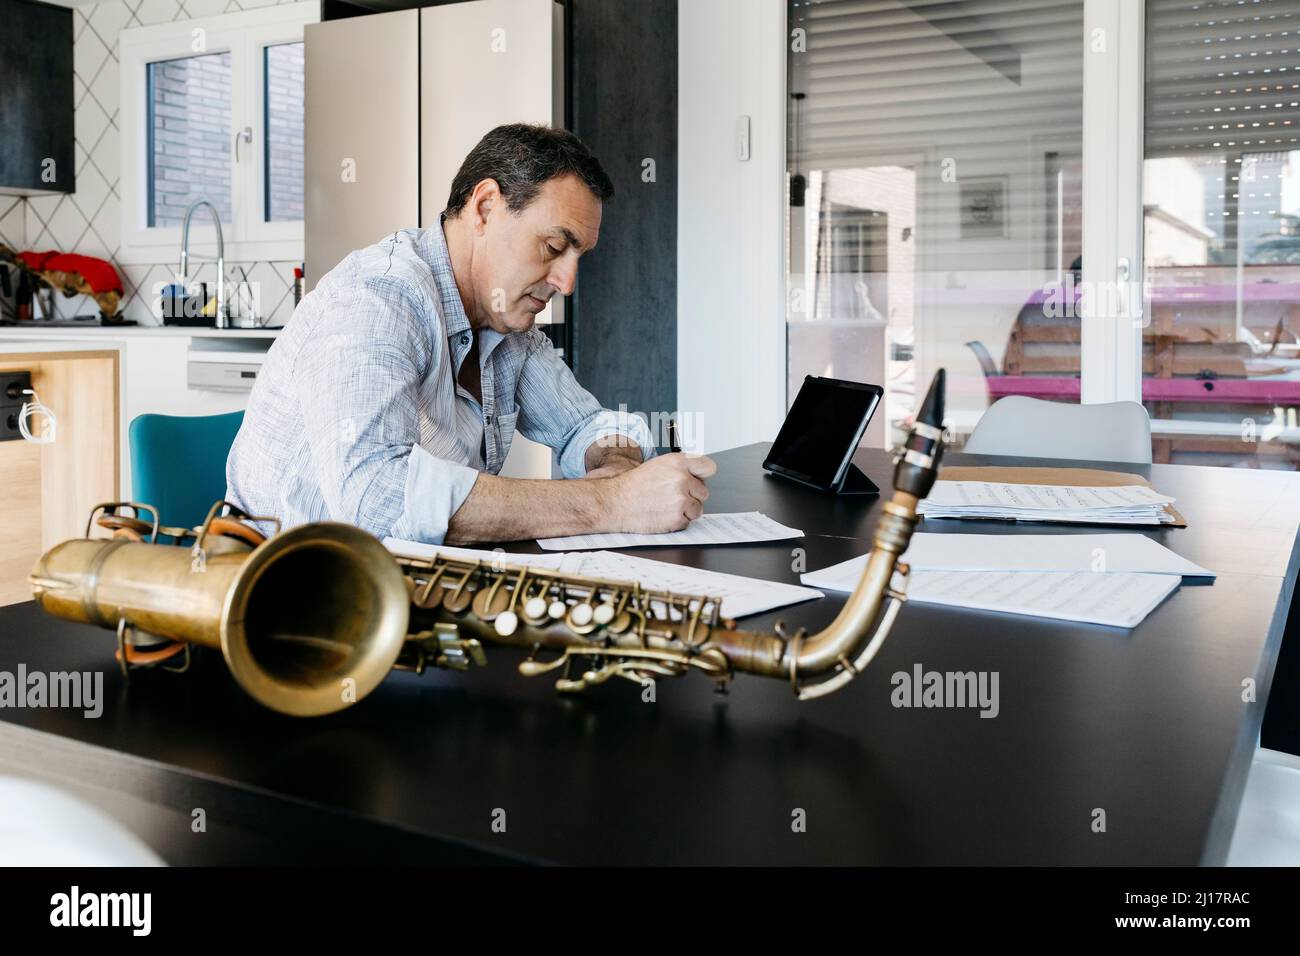 Saxophonist writing musical notes siting in kitchen at table Stock Photo